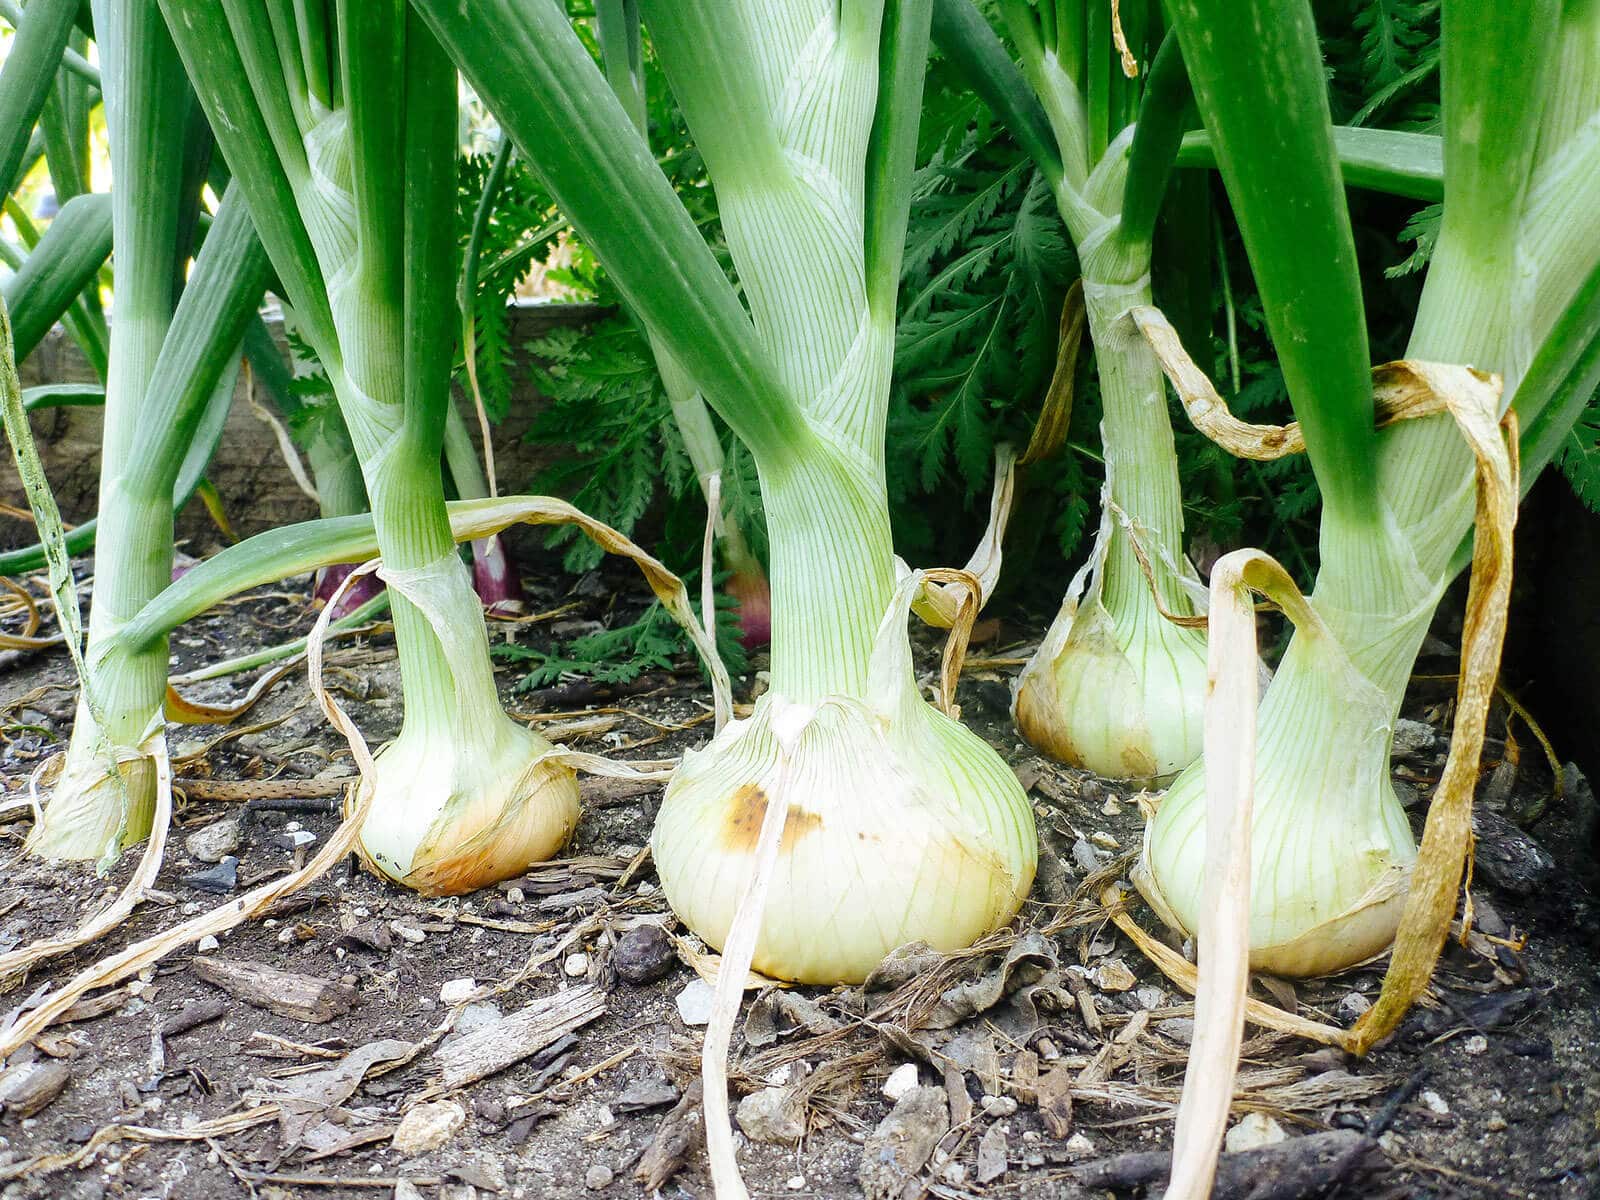 Mature onion plants with bulbs protruding from the soil